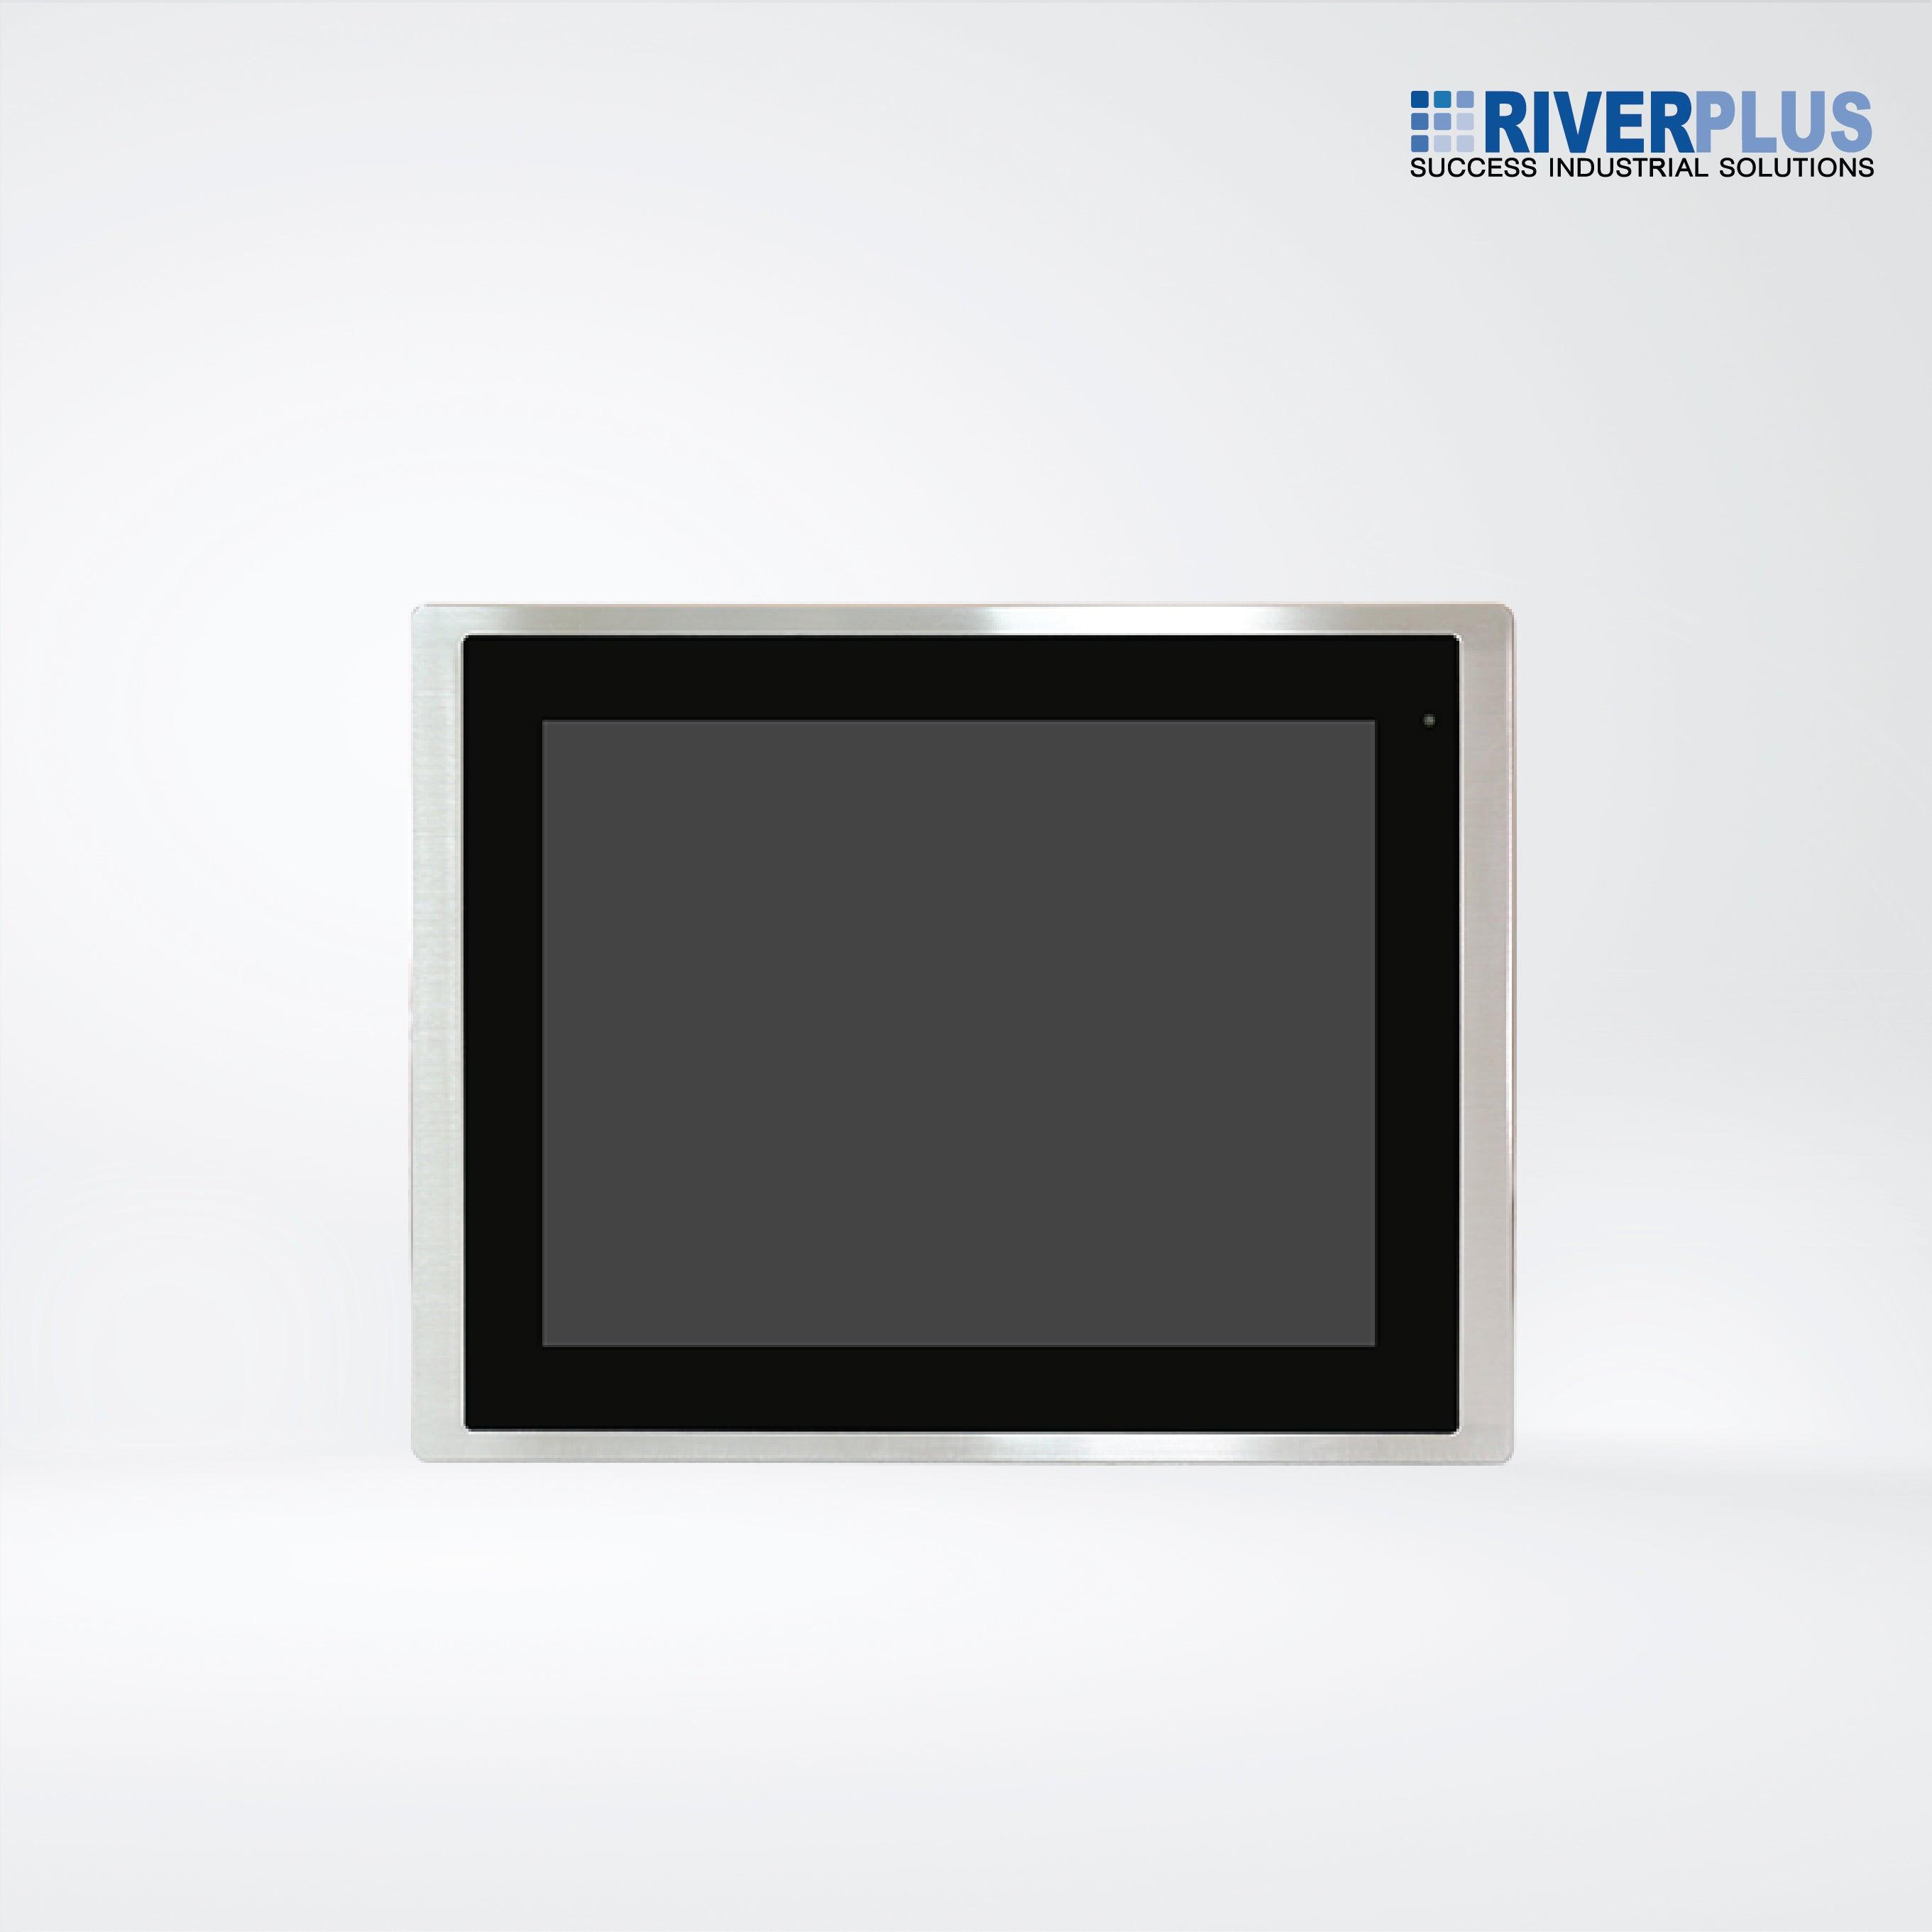 FABS-112RH 12.1” Flat Front Panel IP66 Stainless Chassis Display - Riverplus